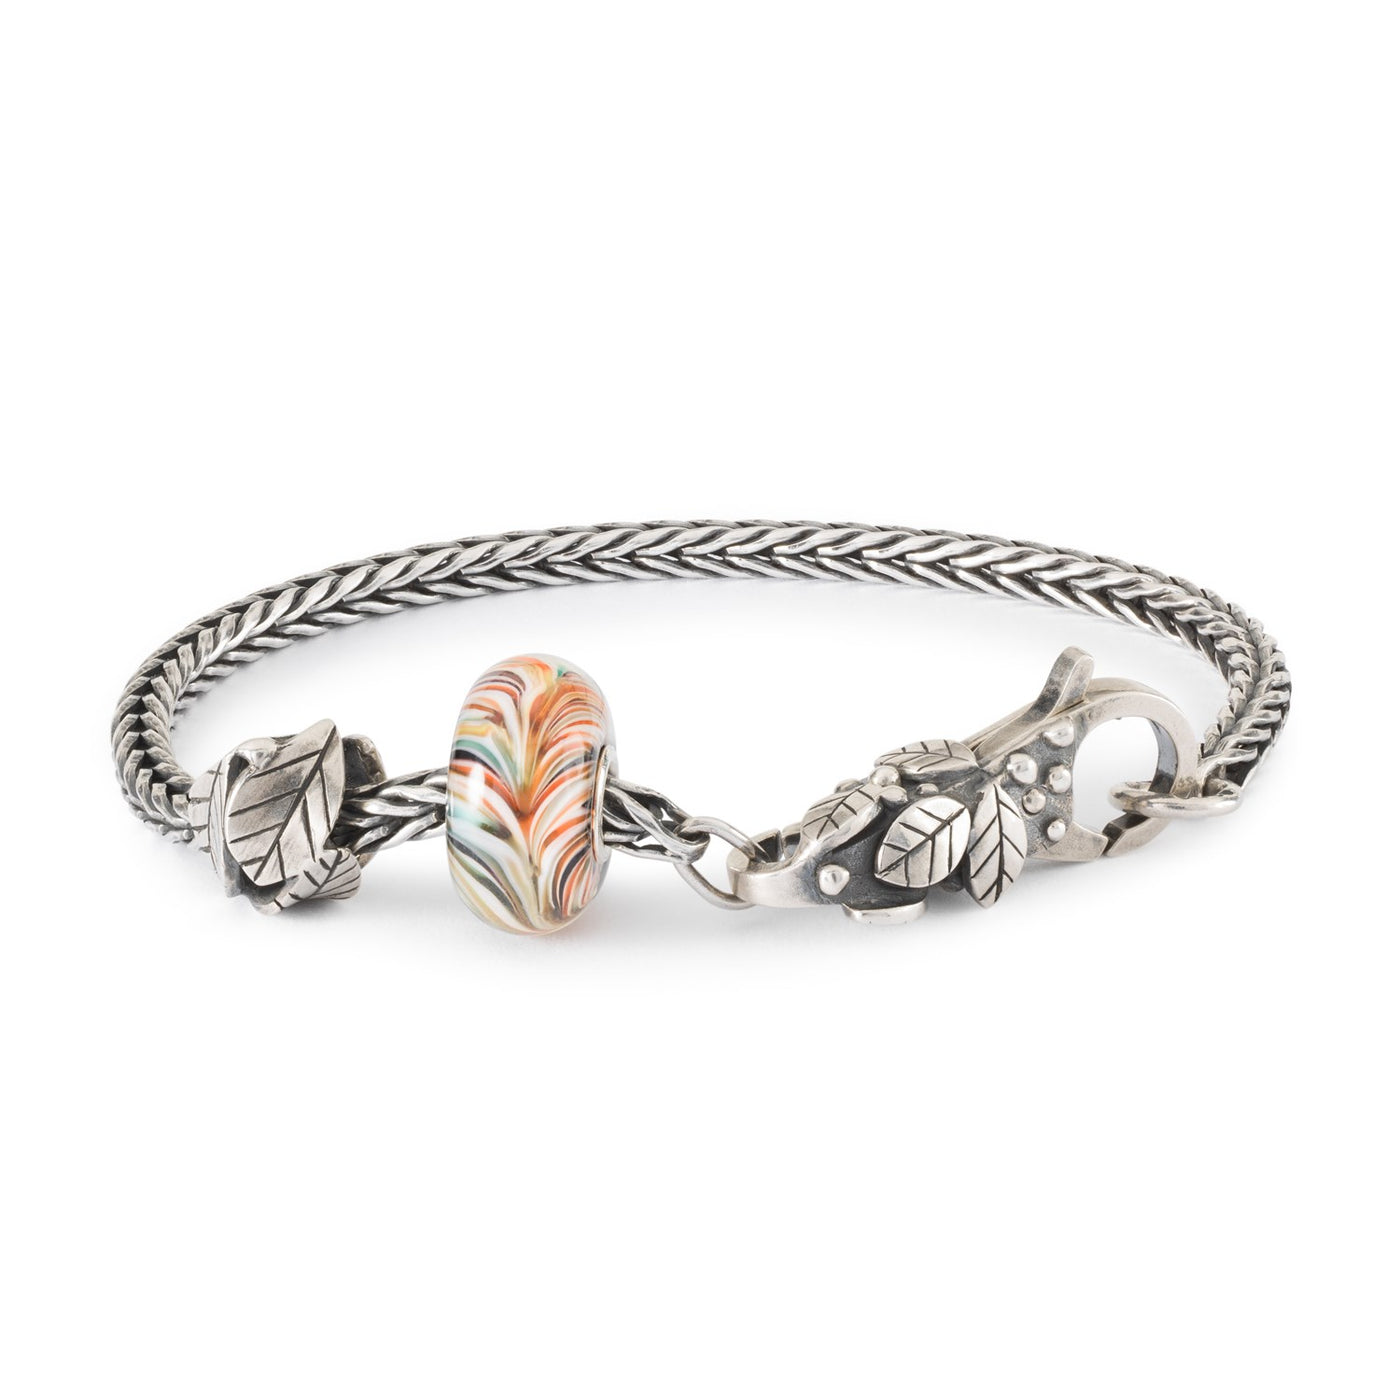 A stylish silver bracelet featuring a Wings of Freedom glass bead and  a silver Departure bead, with a Safe Space clasp for a secure fit.